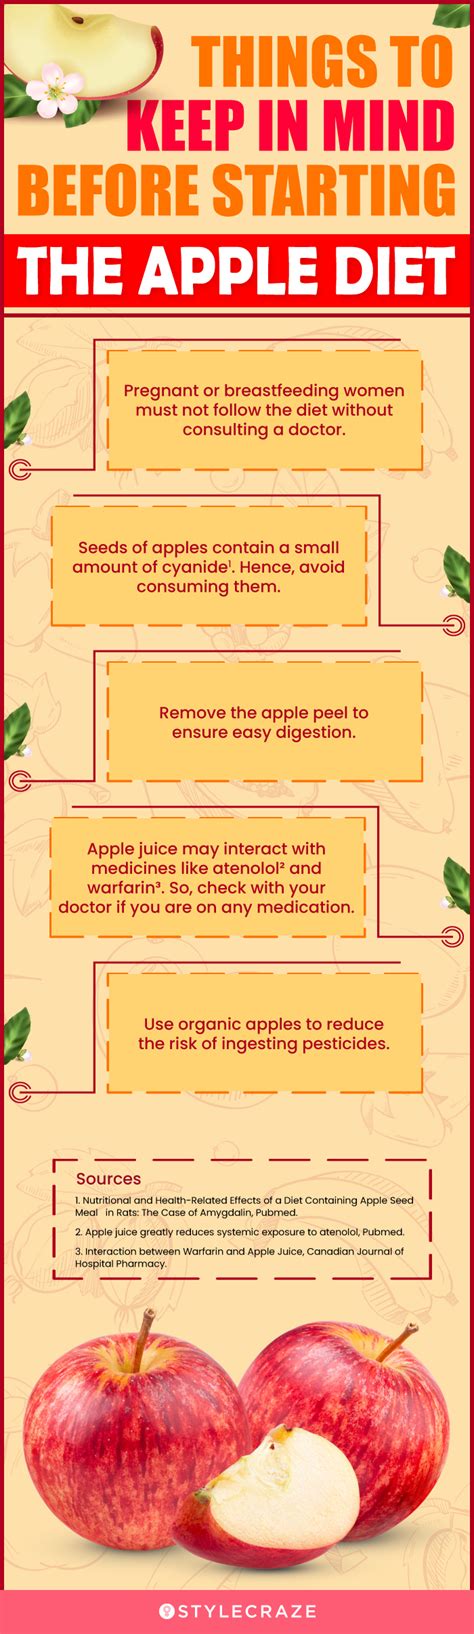 Is Apple good for weight loss at night?